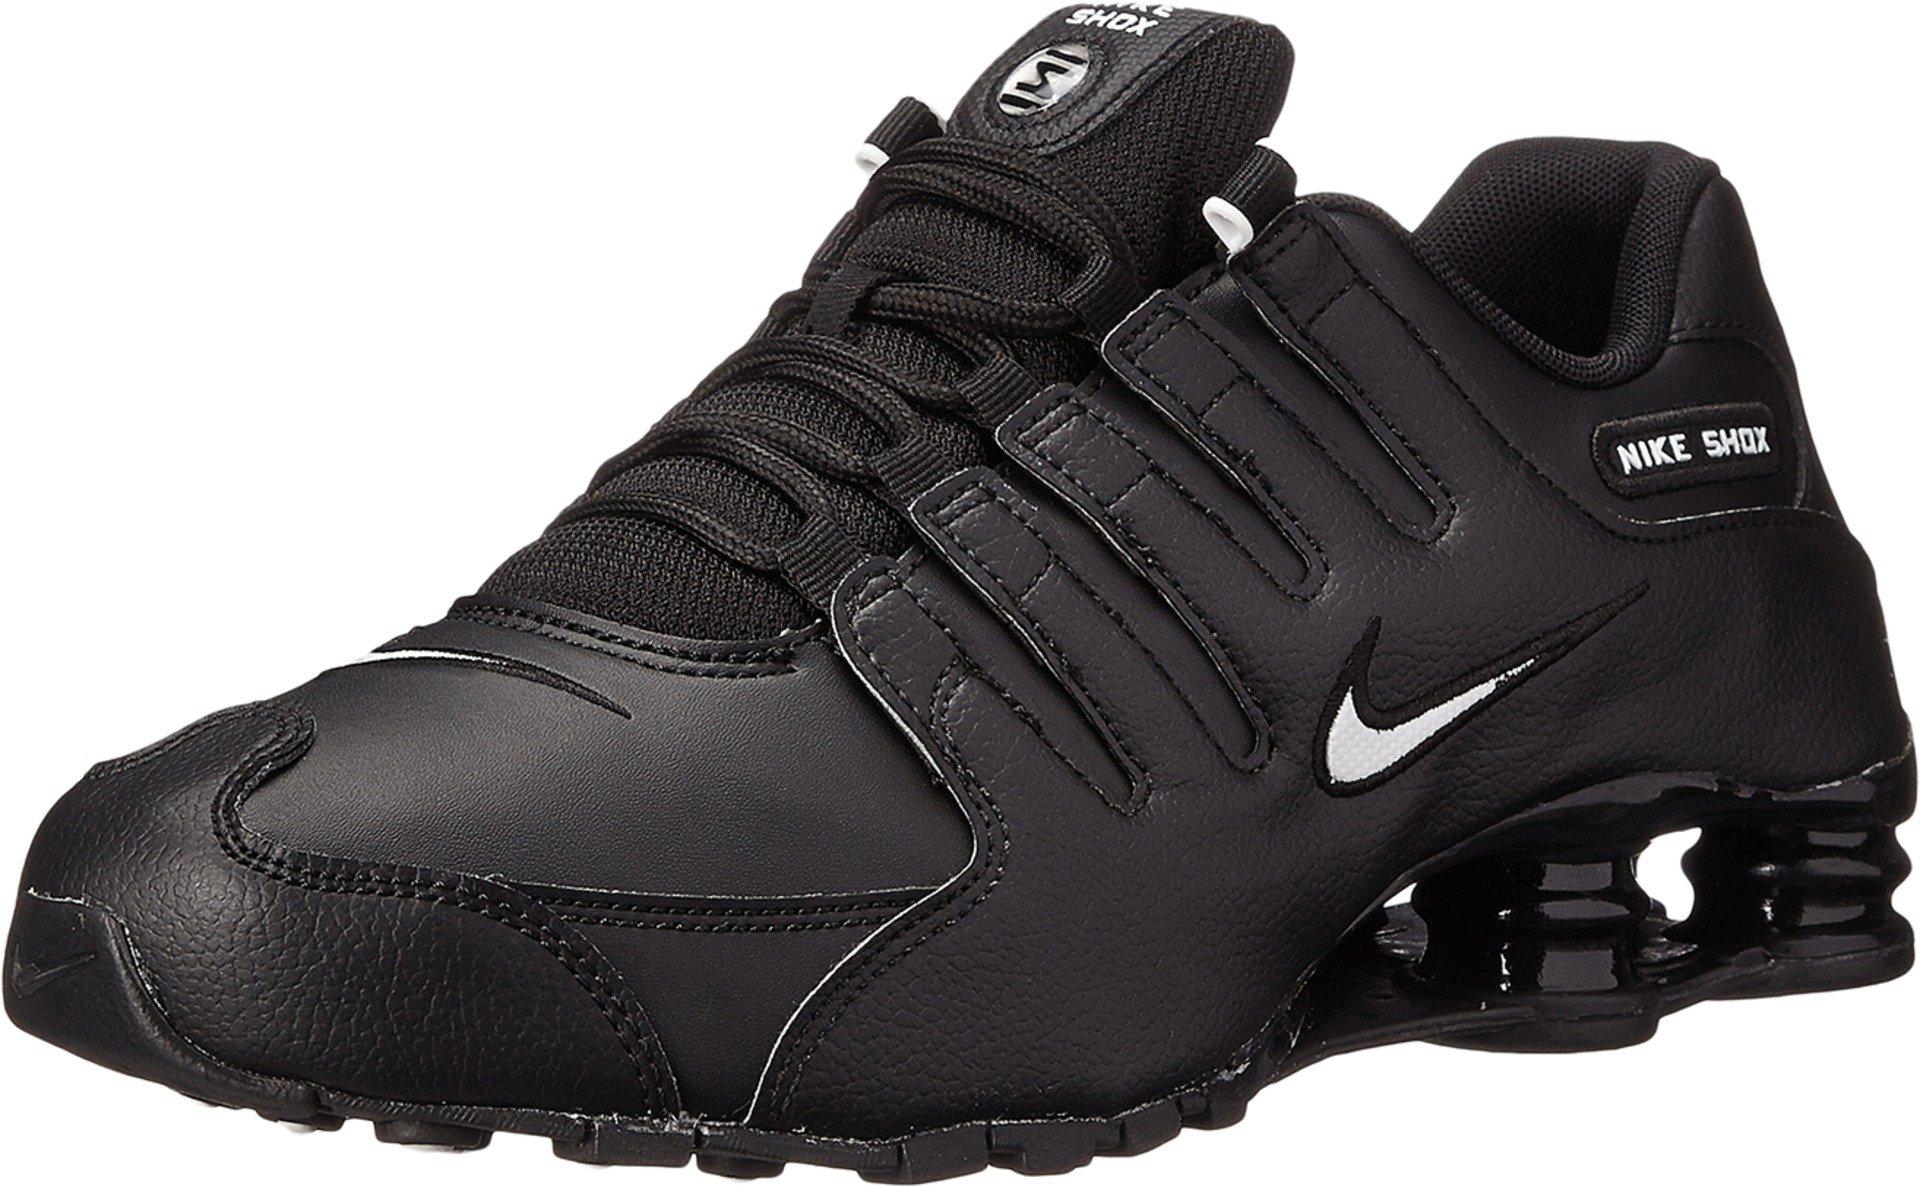 Nike Synthetic Shox Nz Eu in Black/White (Black) for Men - Save 26% - Lyst